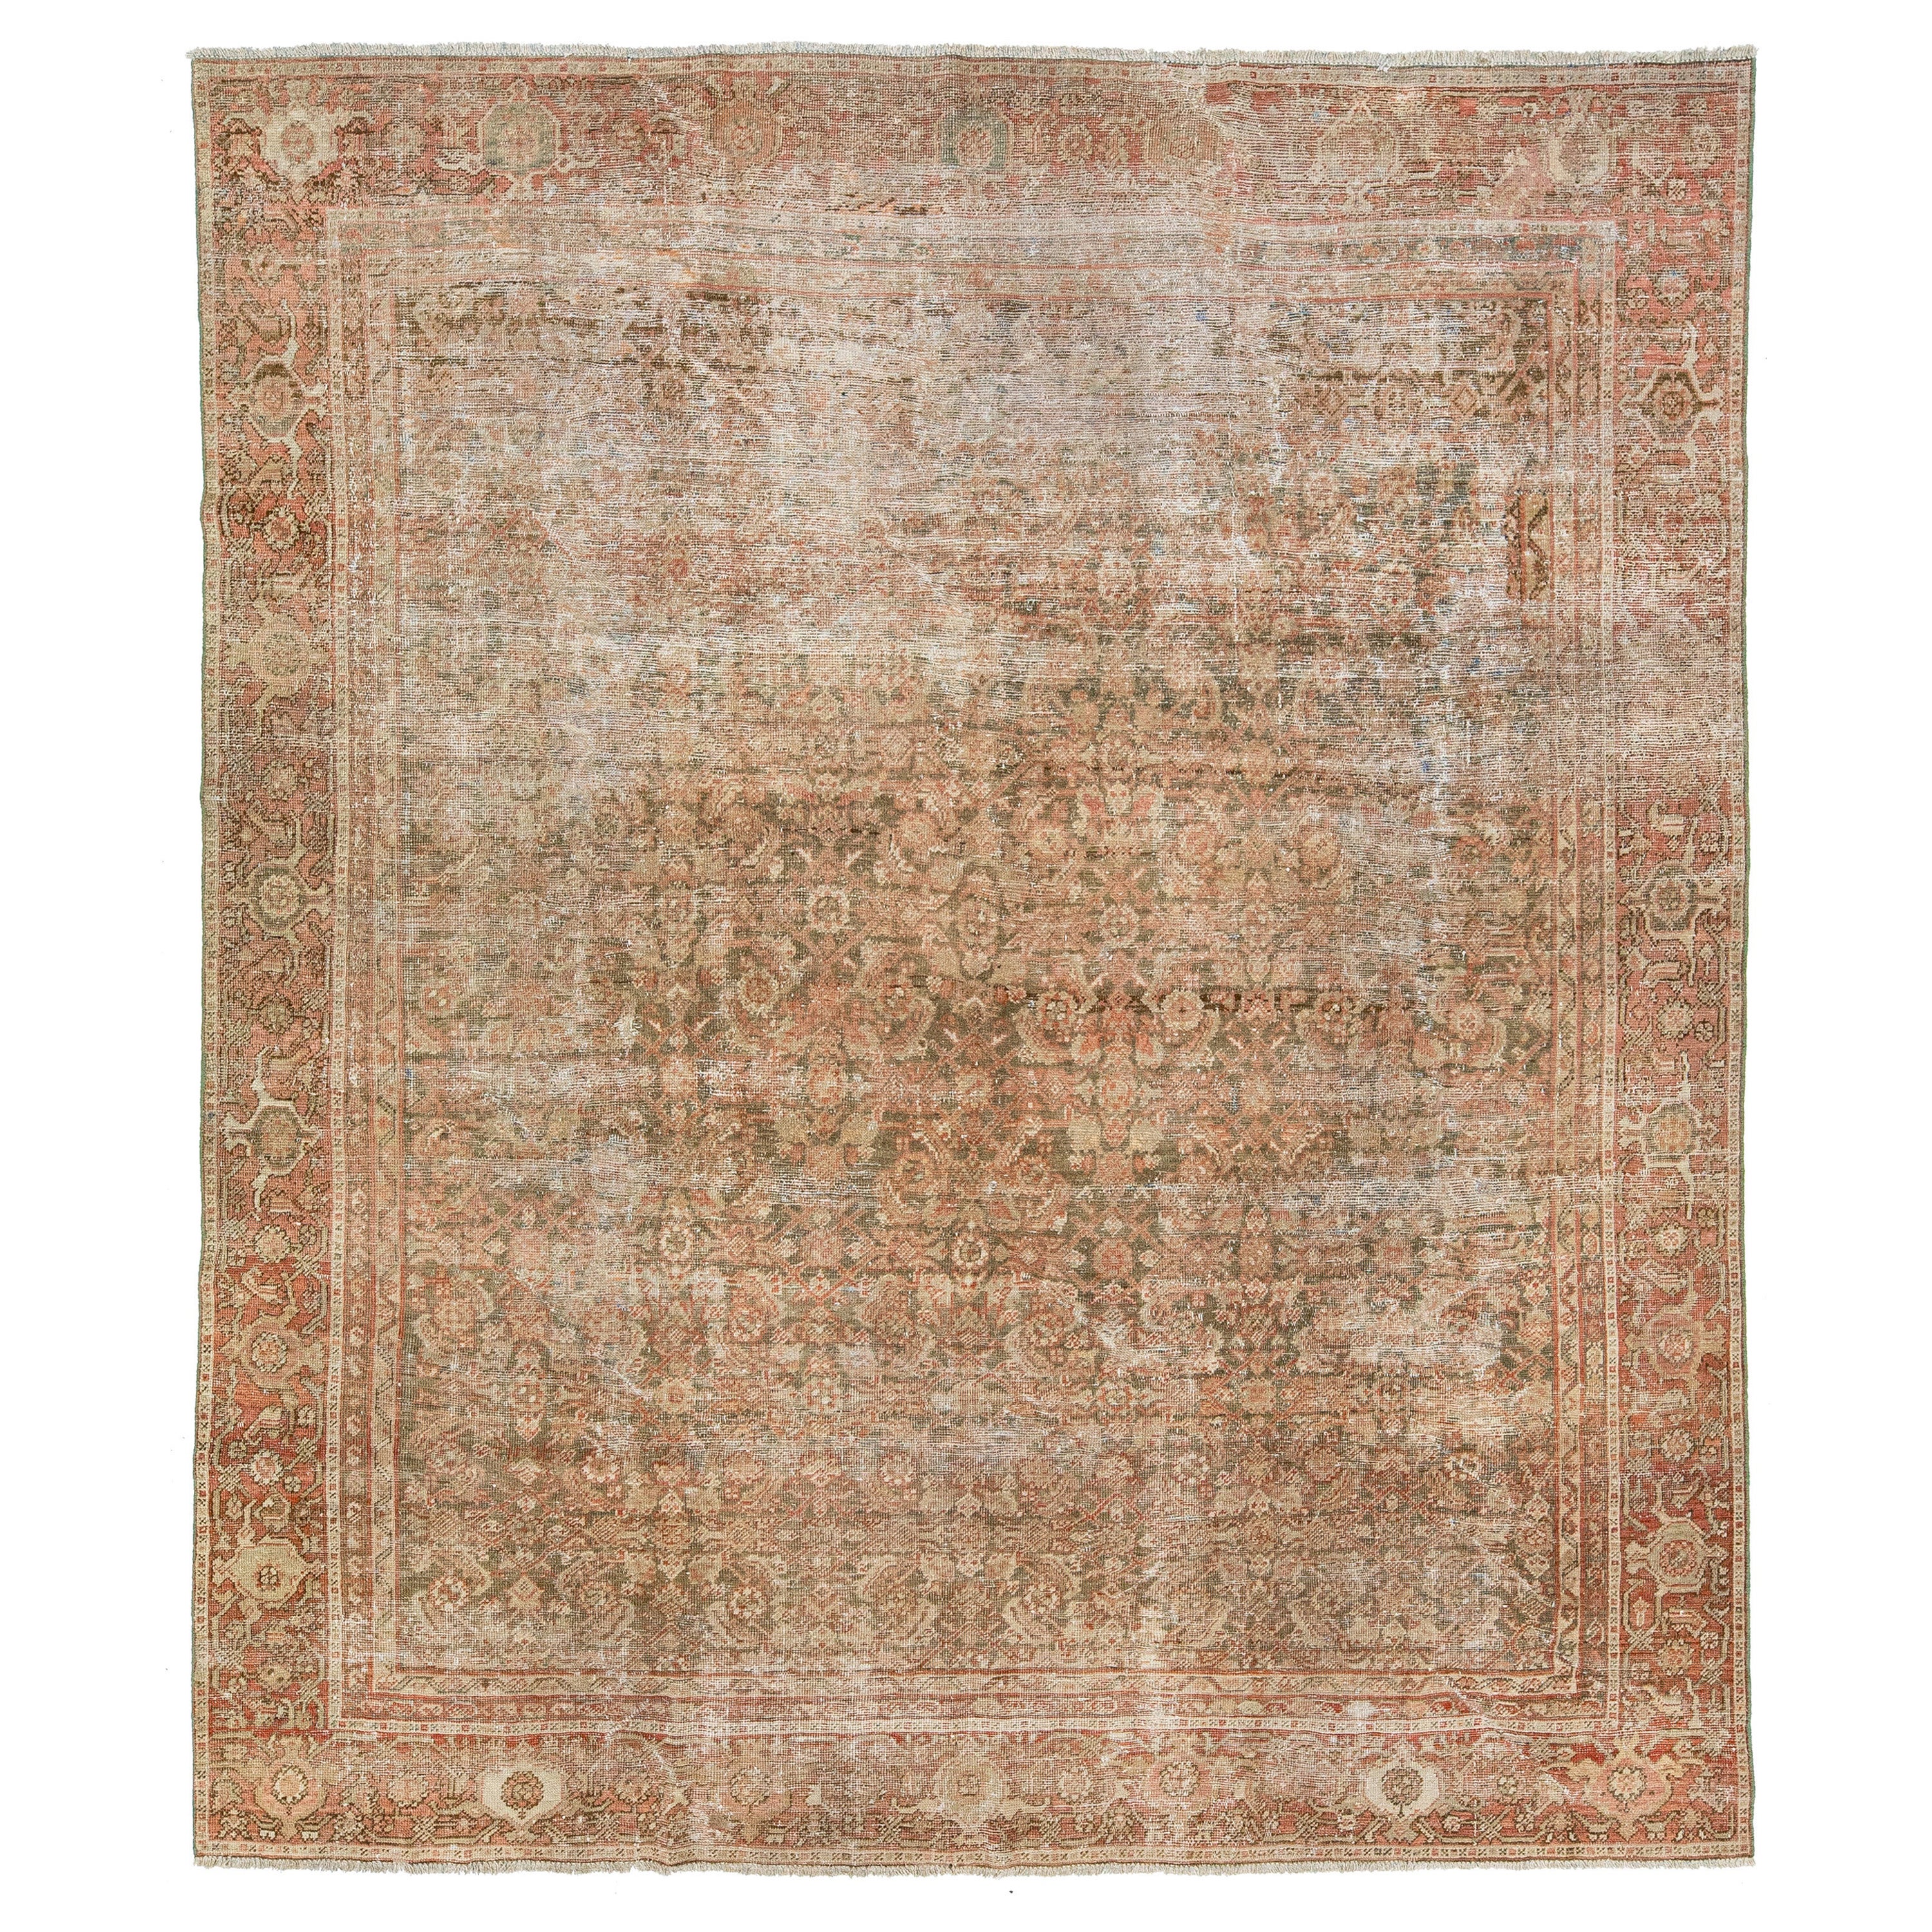 Antique Persian Tabriz Wool Rug with Rust Allover Design from the 1910s For Sale